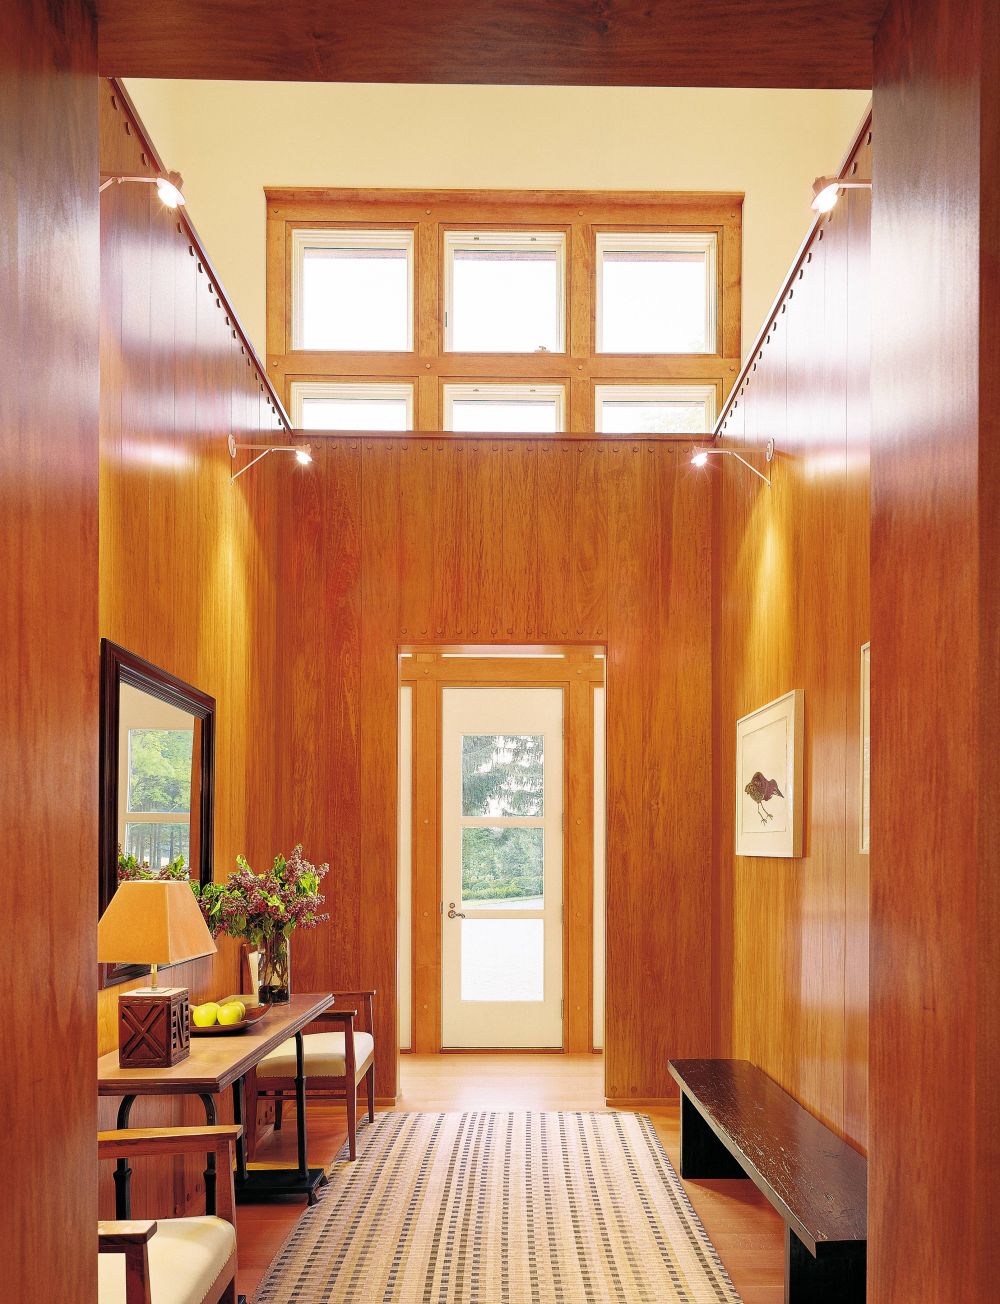 The double height hall of a New Jersey home is grounded by an interior room paneled in yellow cypress